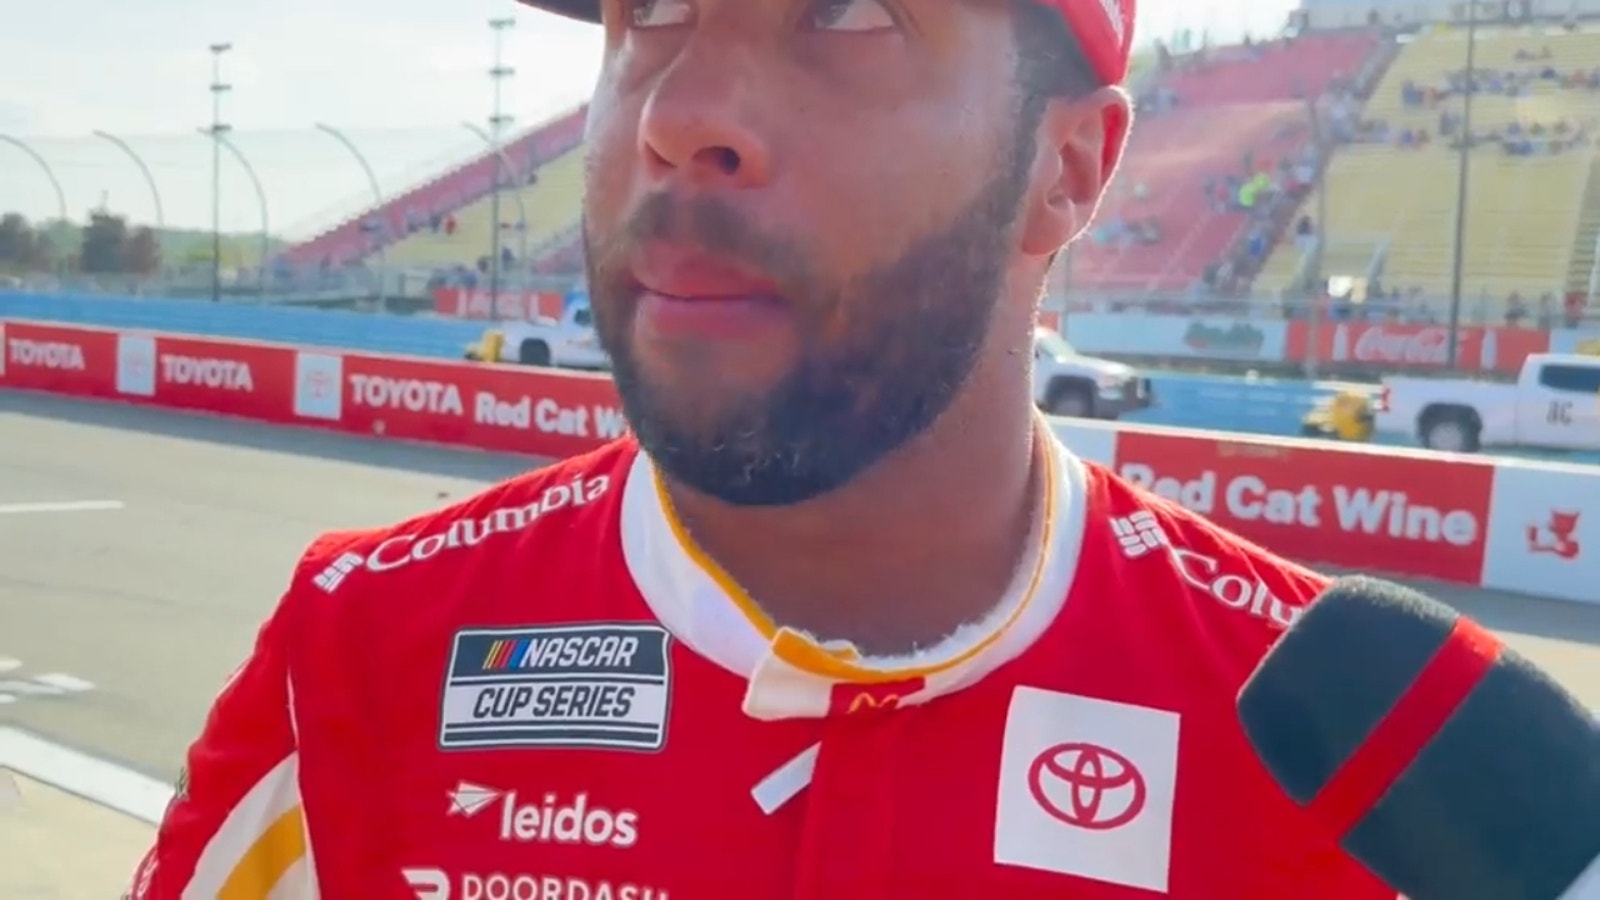 Bubba Wallace discusses his outlook for Saturday's race at Daytona